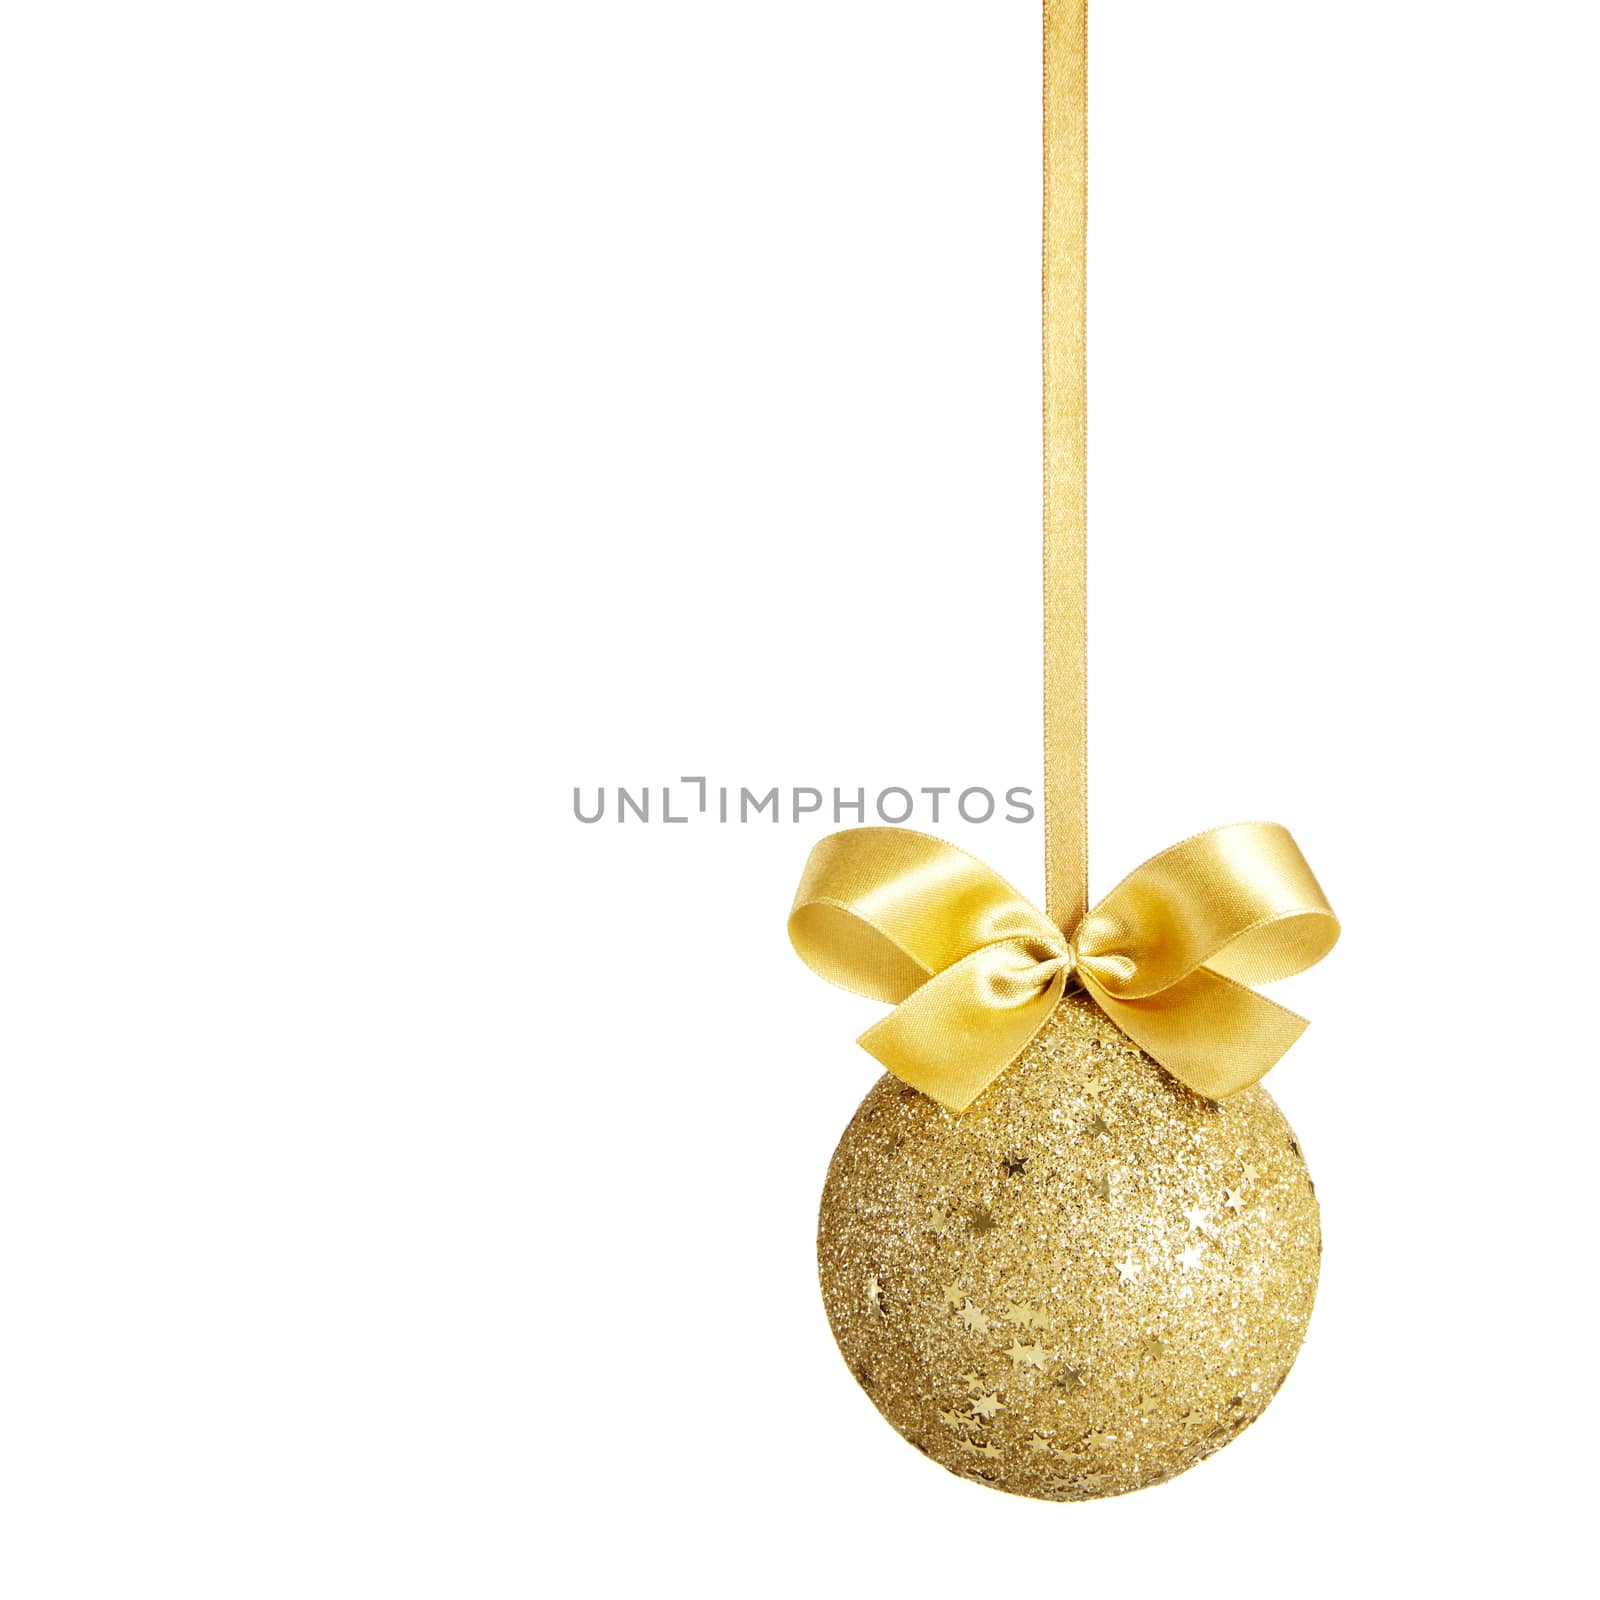 Gold Christmas ball with bow isolated on white background. White copy space for your text and logo.